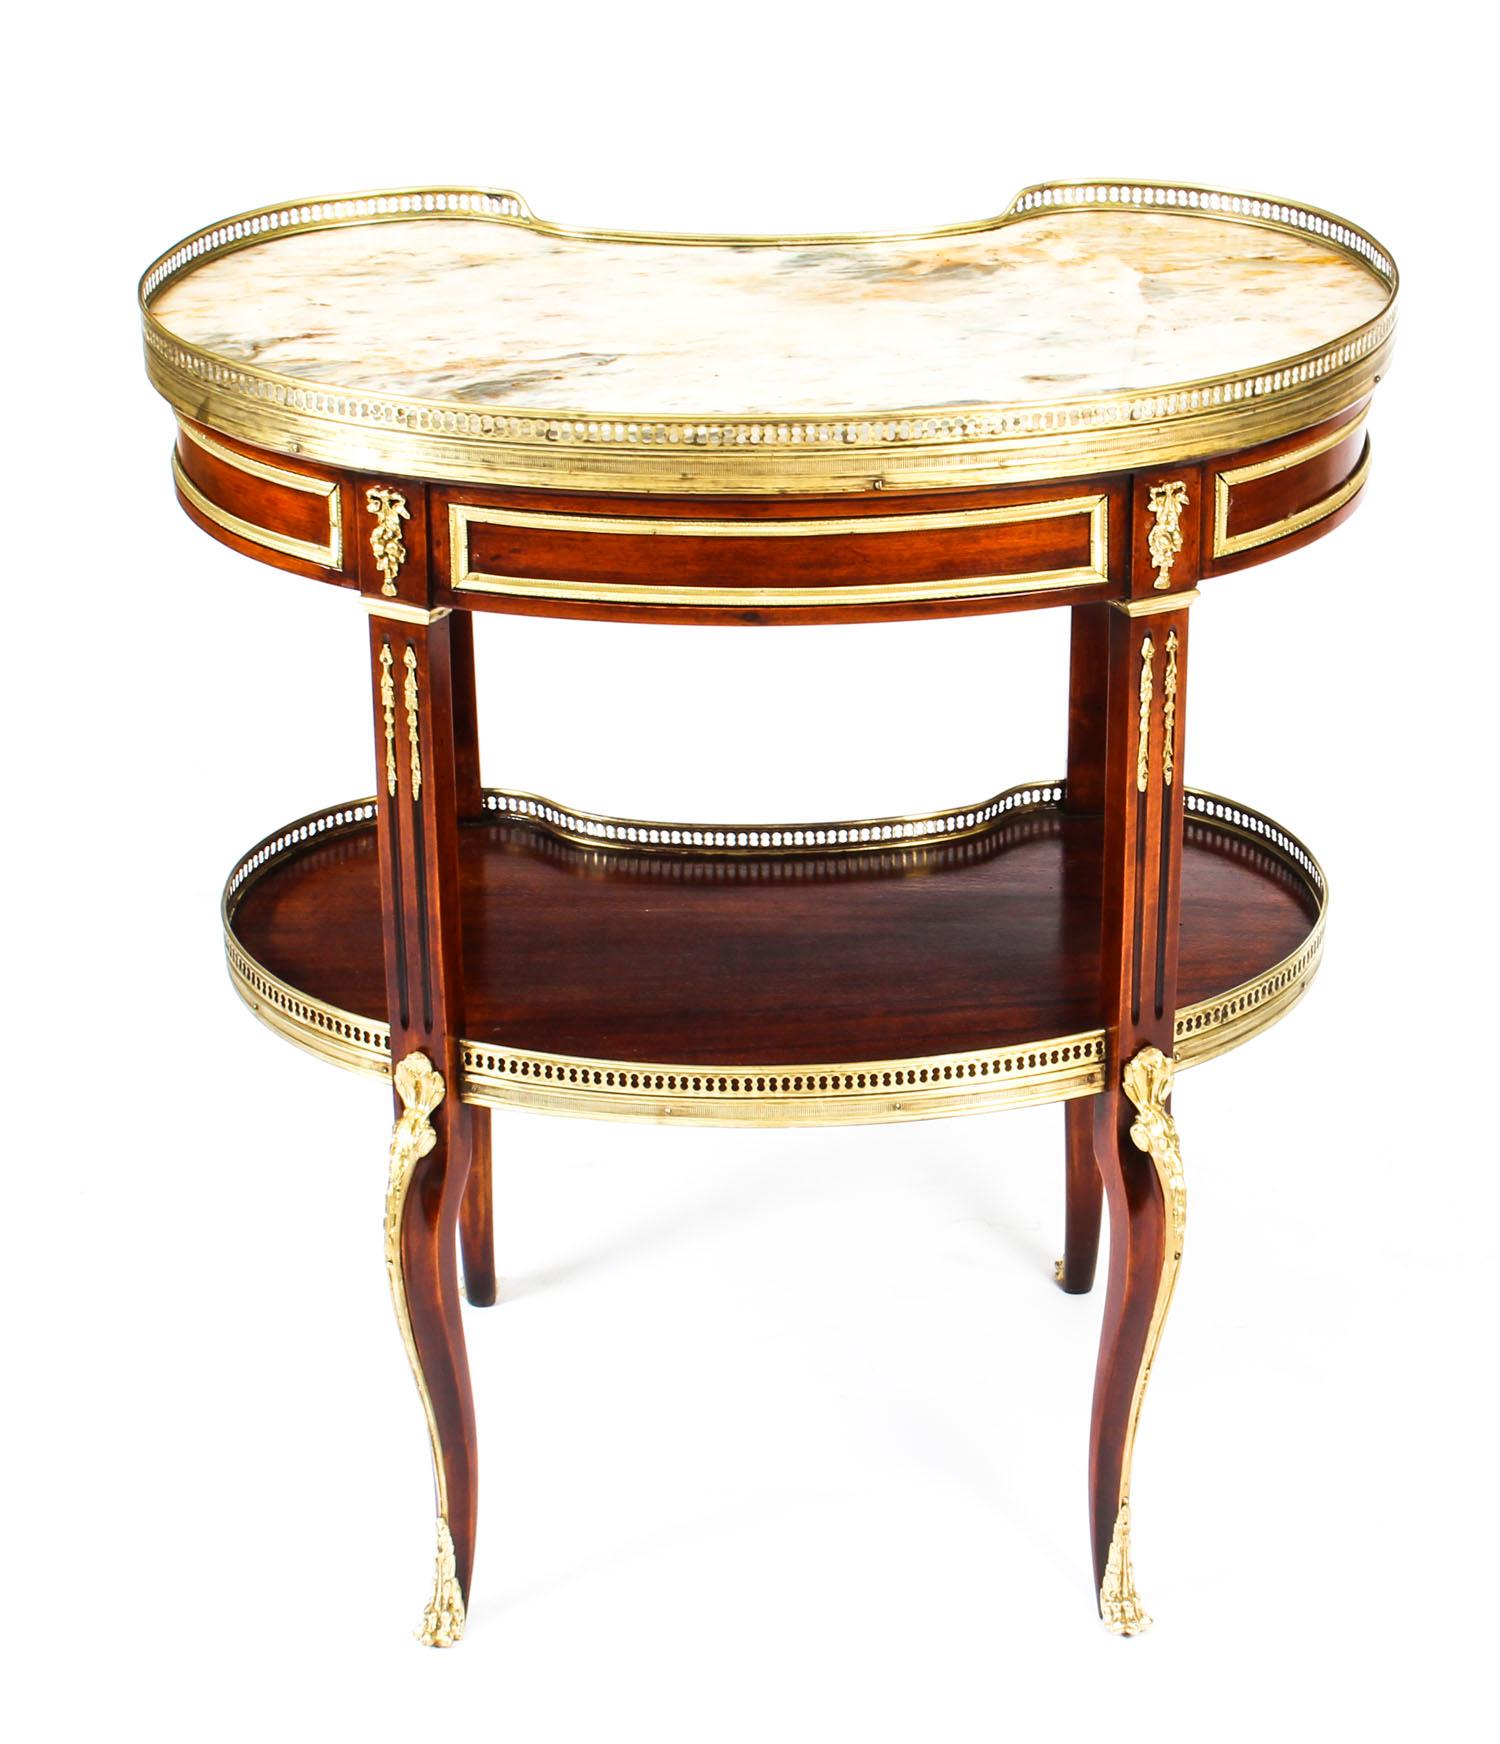 French Louis XVI Revival Kidney Shaped Marble-Top Side Table, 19th Century 2